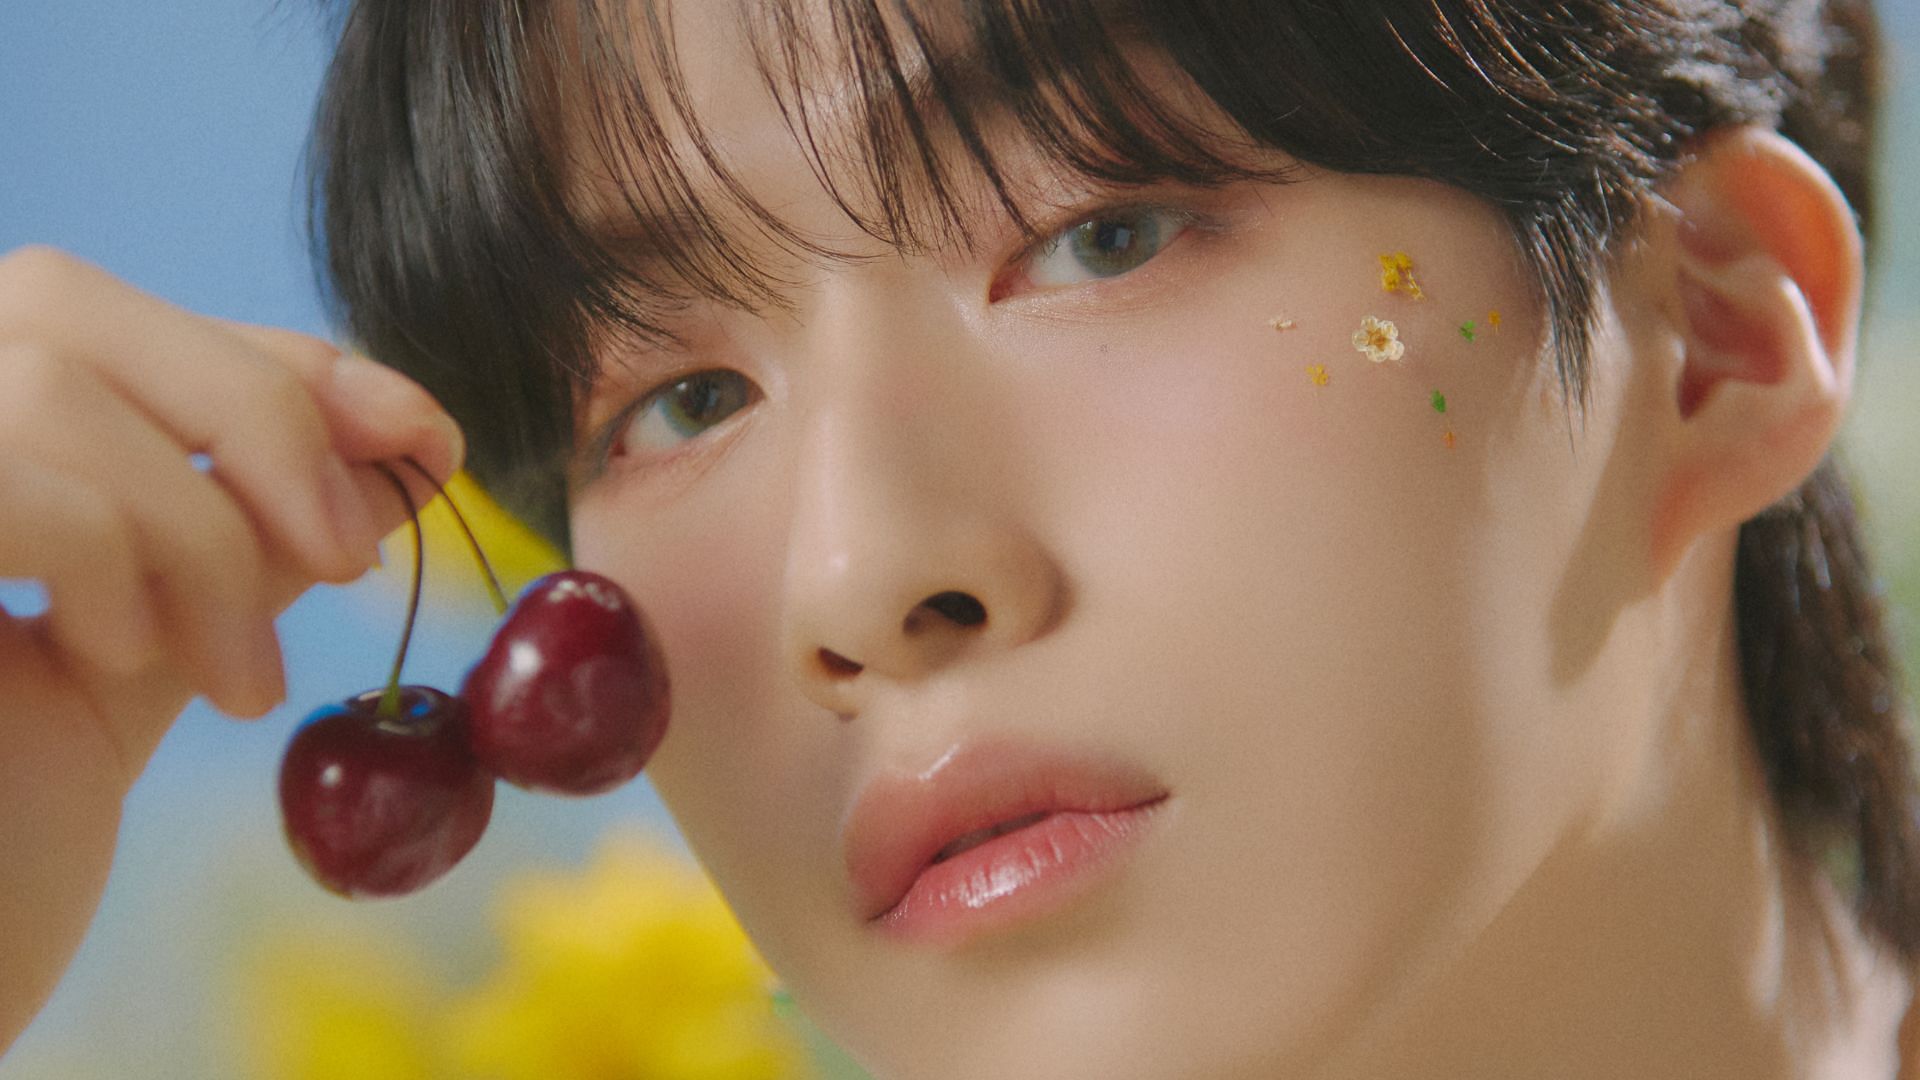 ONEUS&#039; Xion talks about propelling Korean culture via their music (Image via RBW and Lobeline)